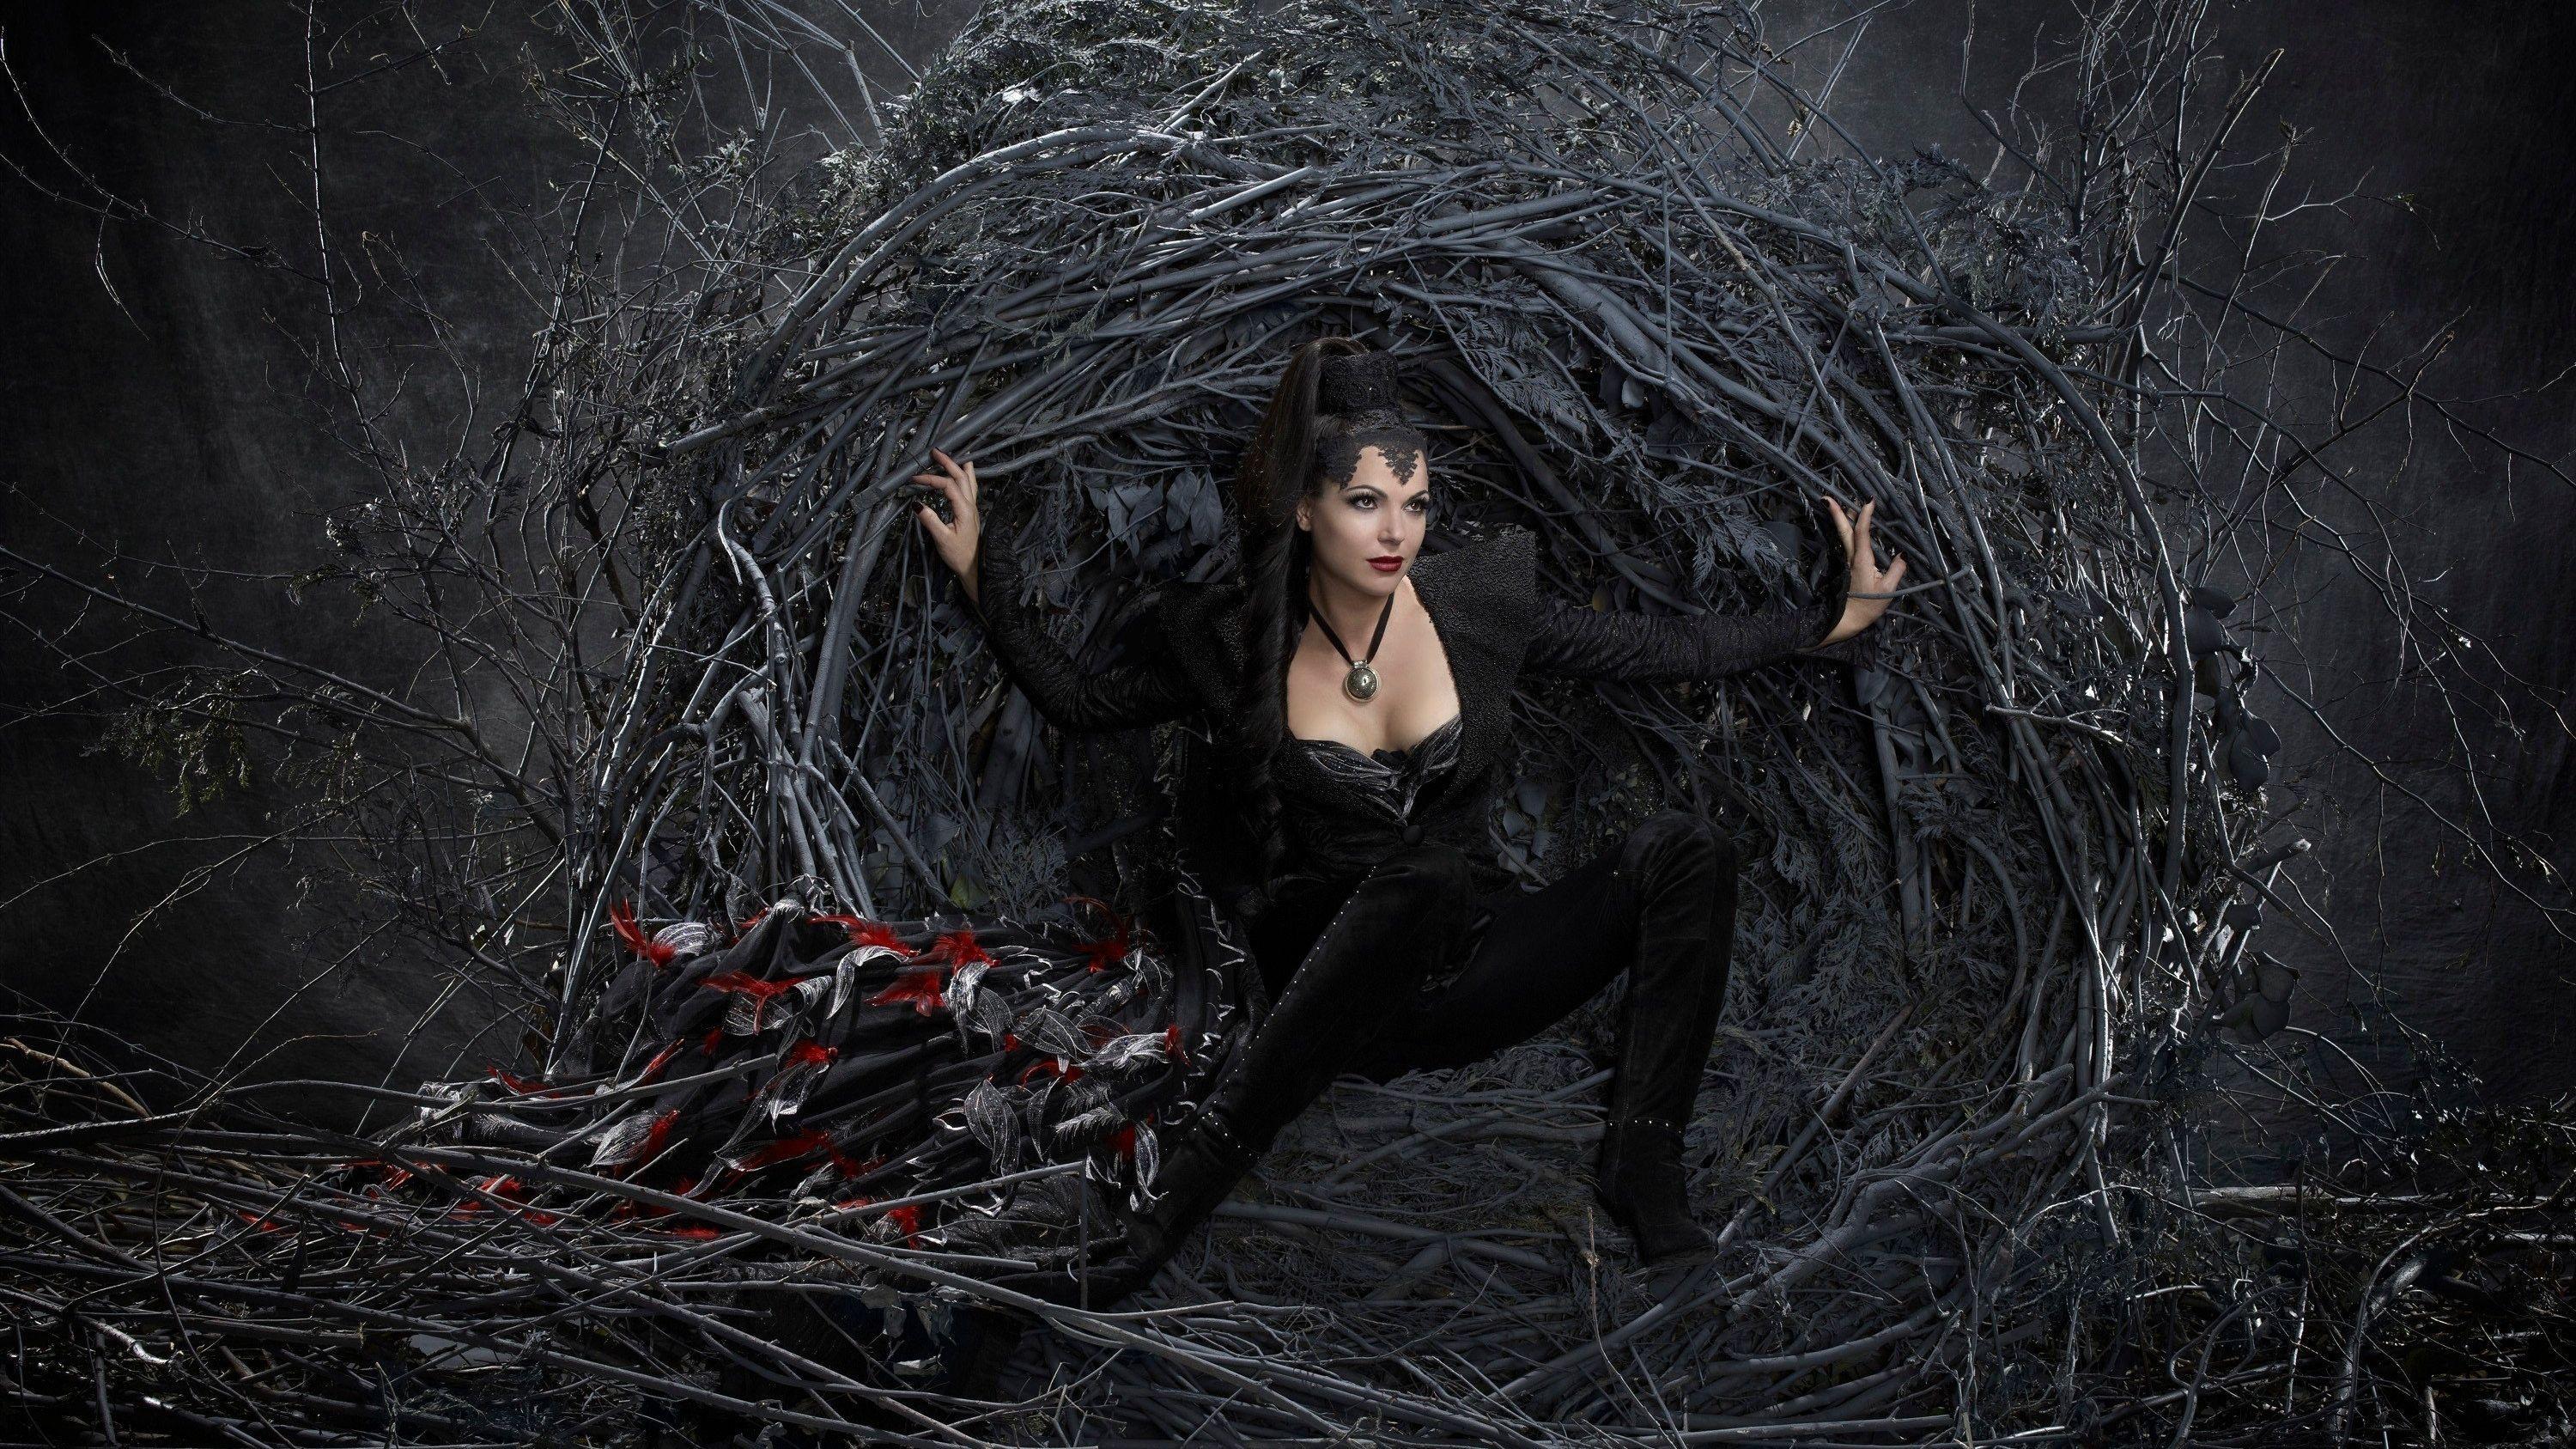 Regina, better known as the Evil Queen HD Wallpaper. Background